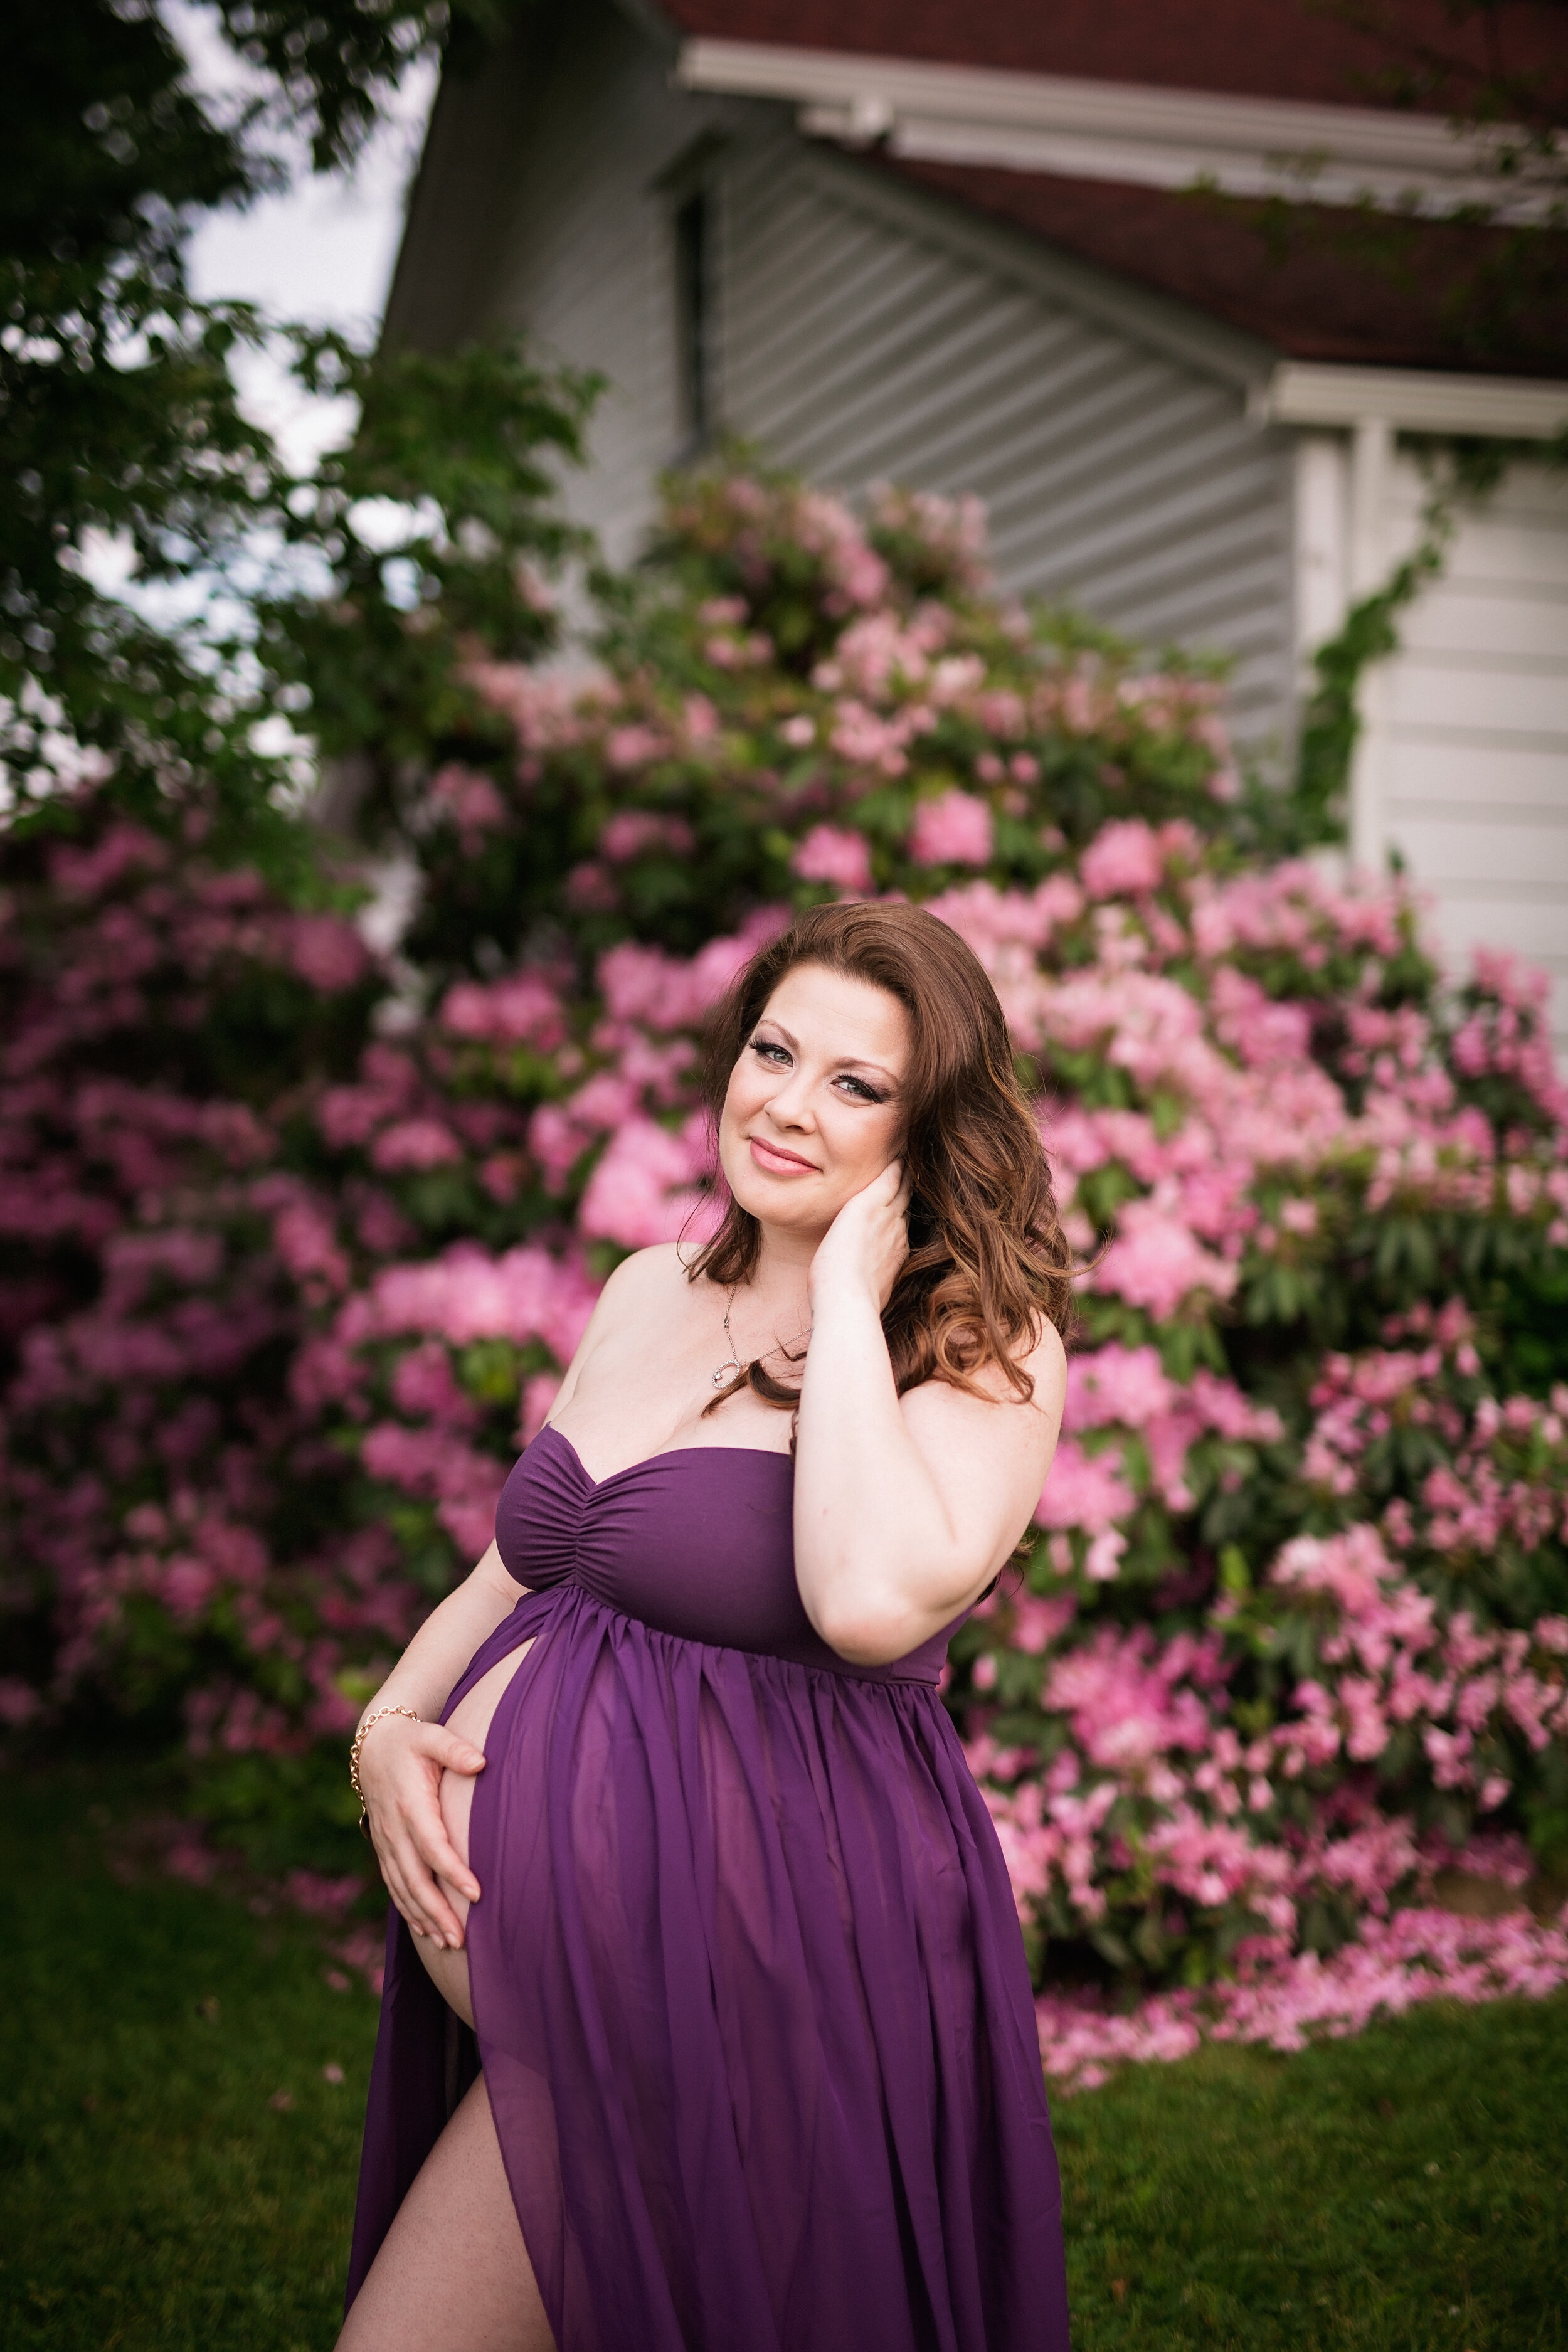  Woman in purple maternity gown posing in front of flowerbed 